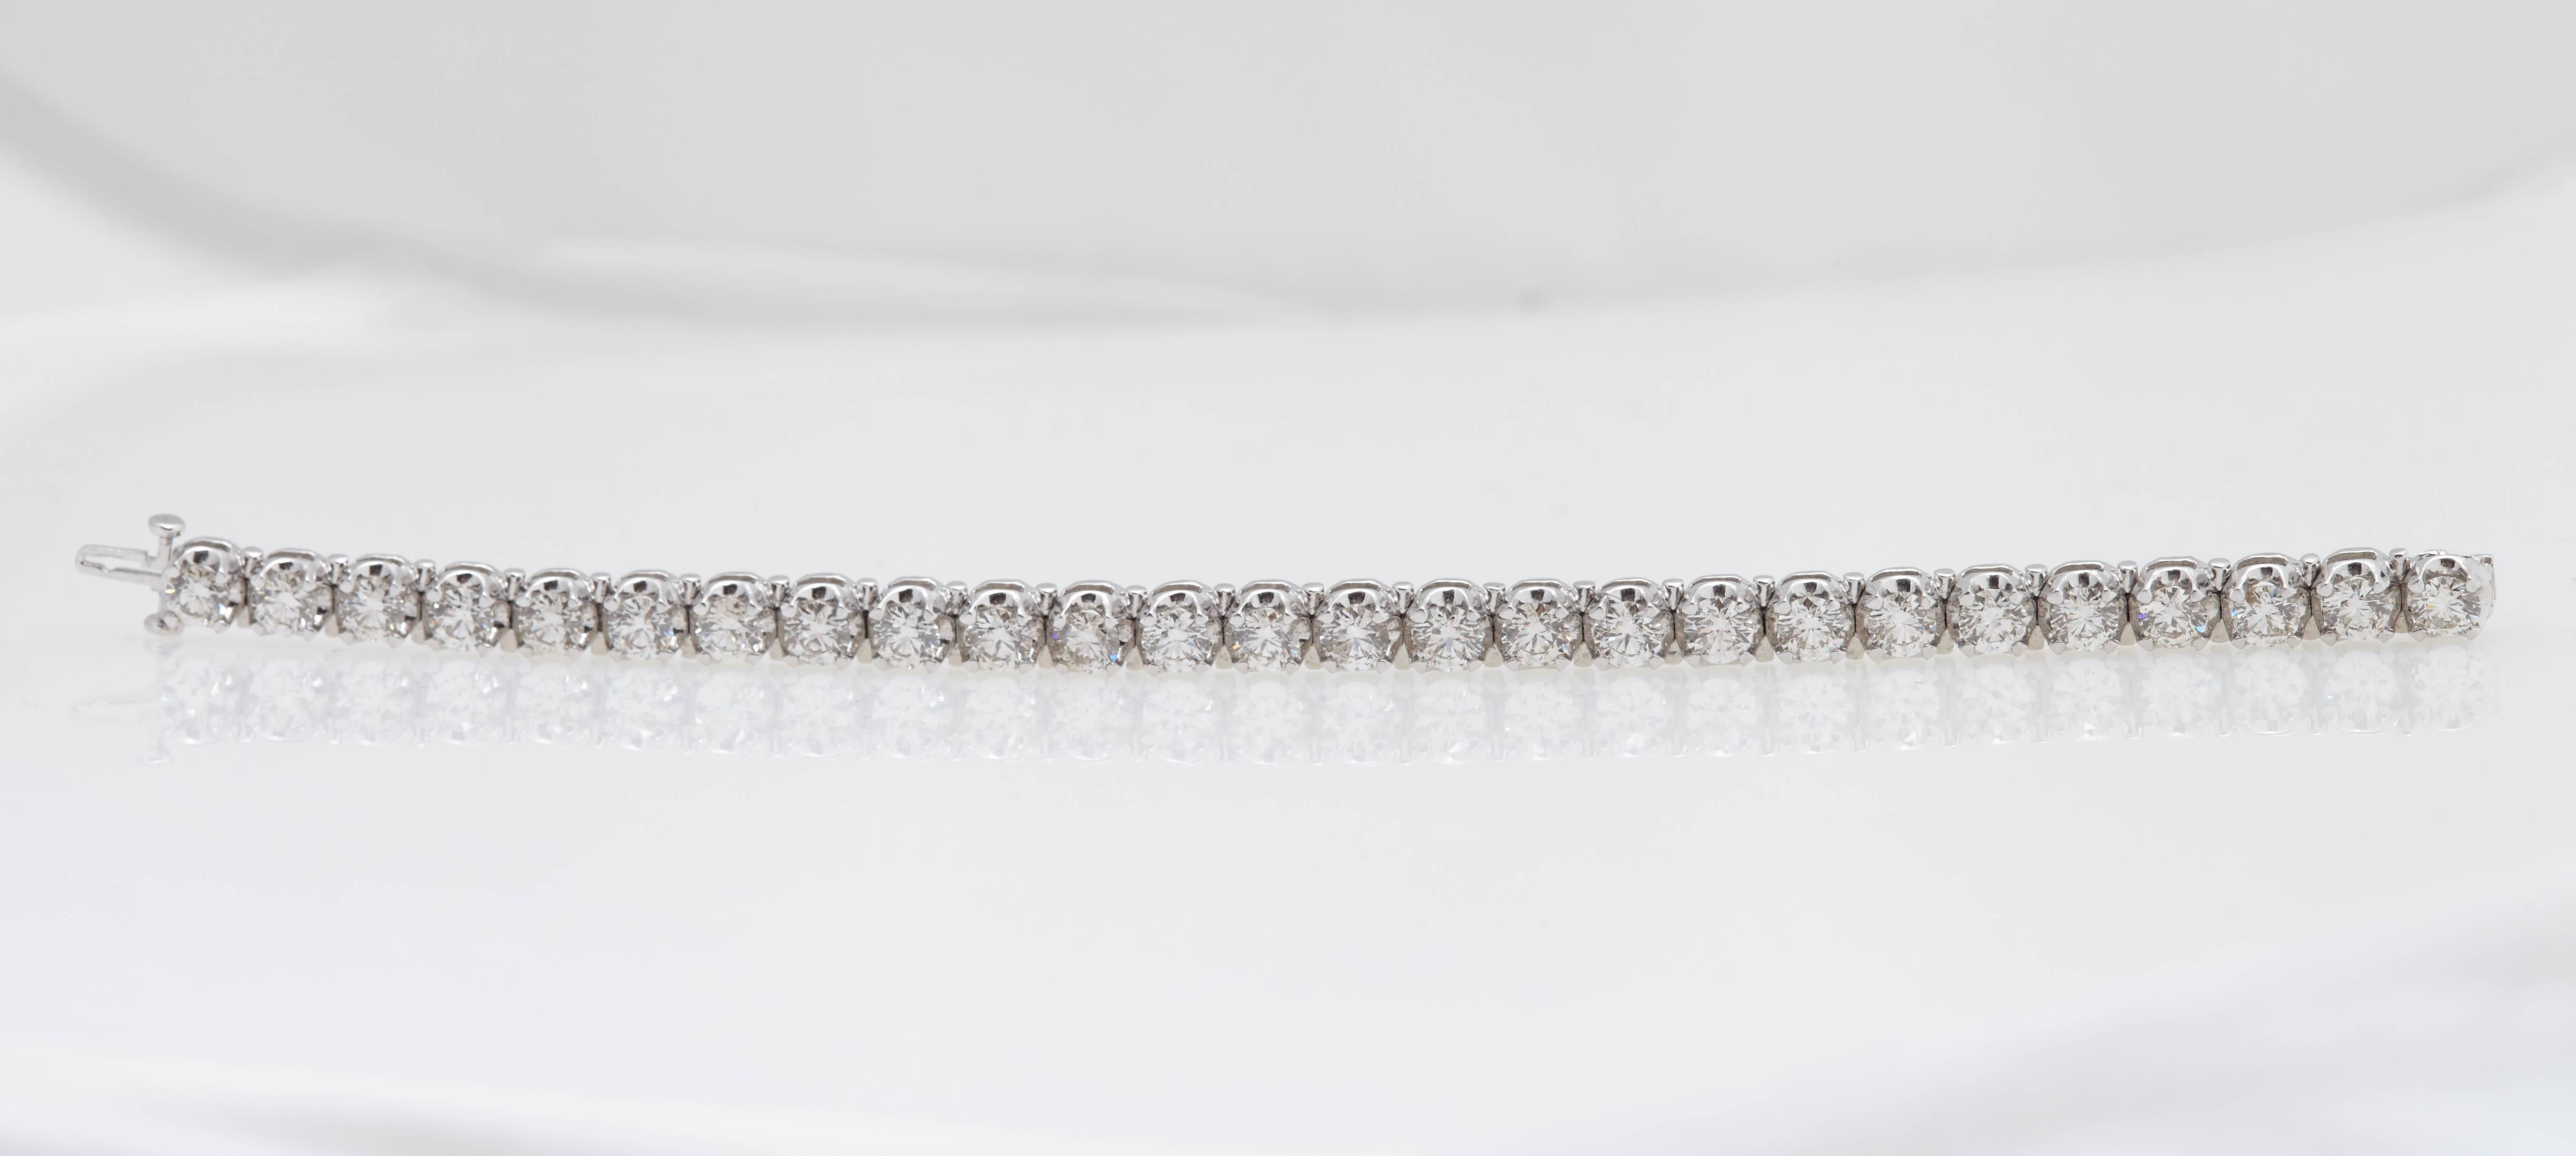 Beautiful fourteen karat white gold tennis bracelet made up of 26 round diamonds with a total weight of 13.26 carats. The average weight of the diamonds is over .50 carat. The diamonds are "H/I" in color and "SI" in clarity.  The